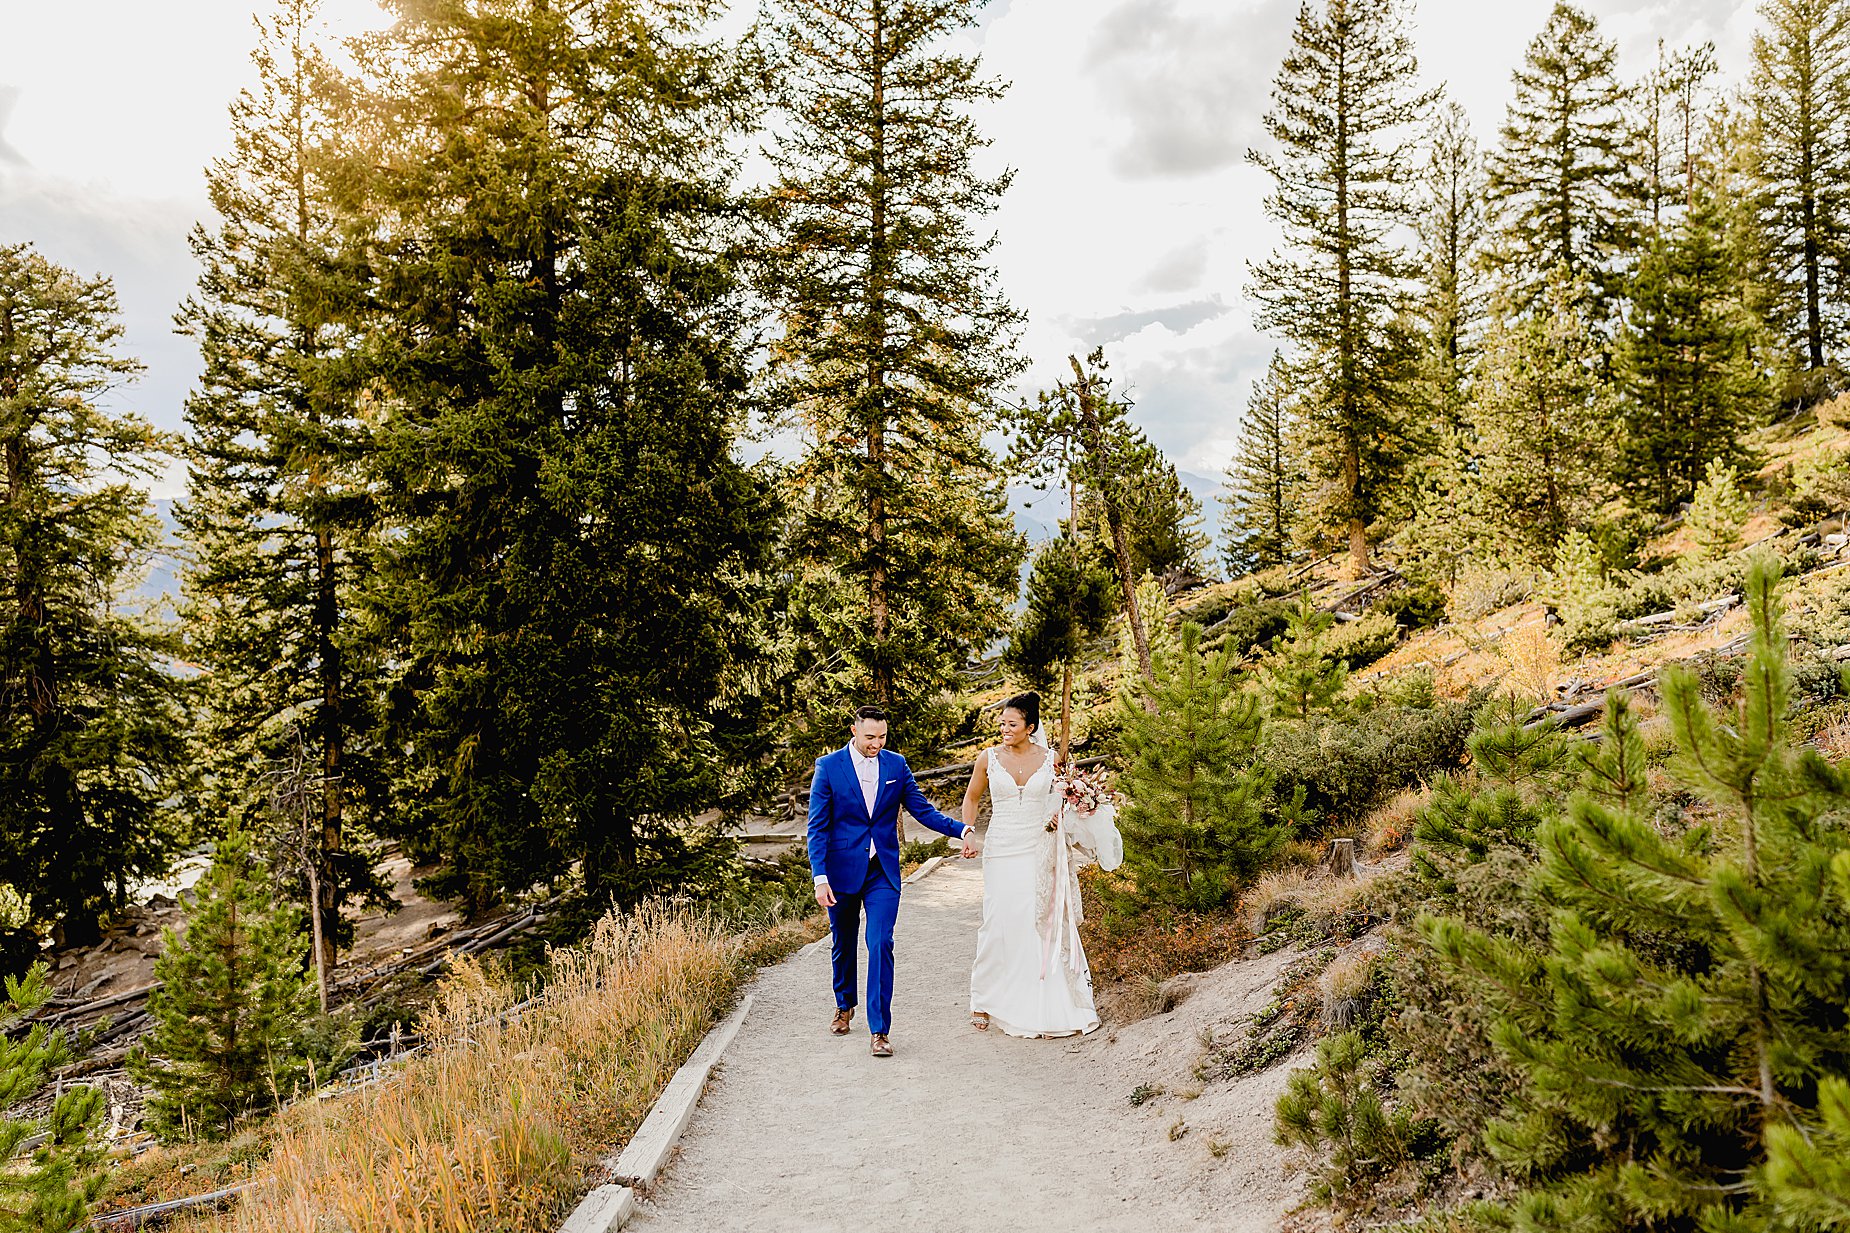 Couple hikes through forest in breckenridge colorado for their fall elopement